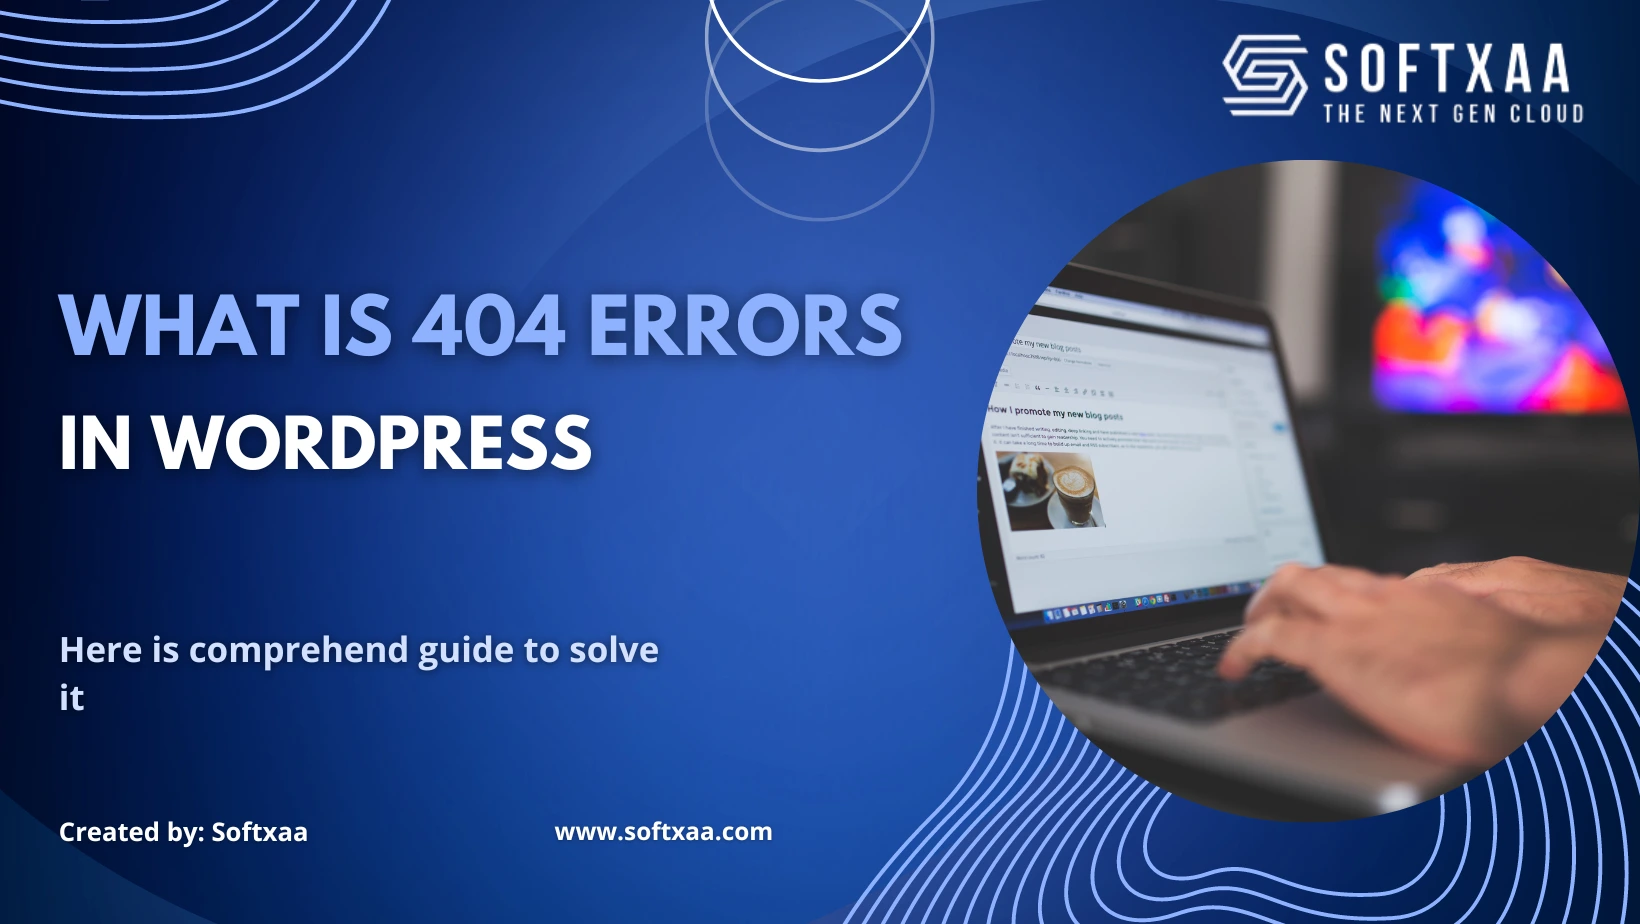 What is a 404 Errors in WordPress?